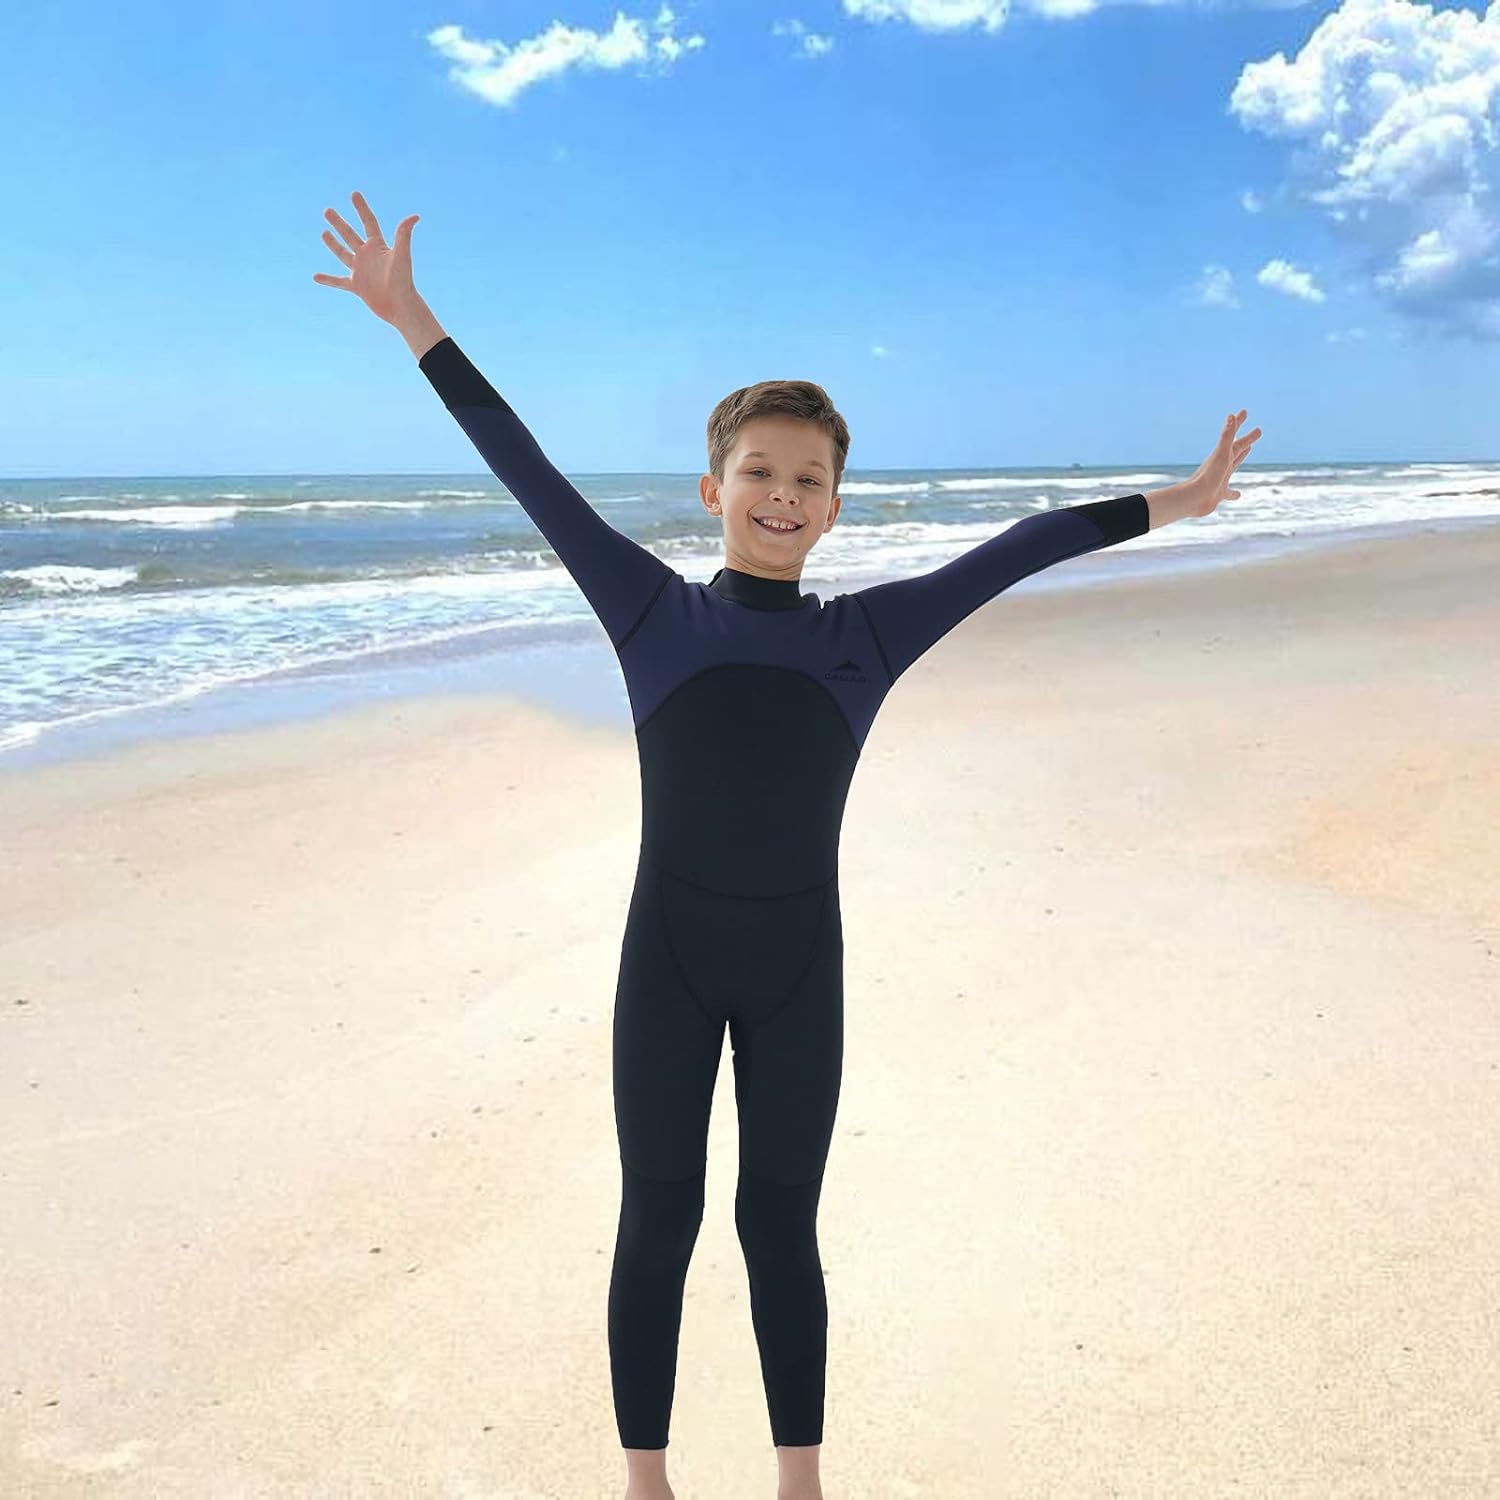 Sun Protection Keep Warm for Snorkeling Surfing M121 Neoprene One-pieces Long Sleeves Kid Diving Suit